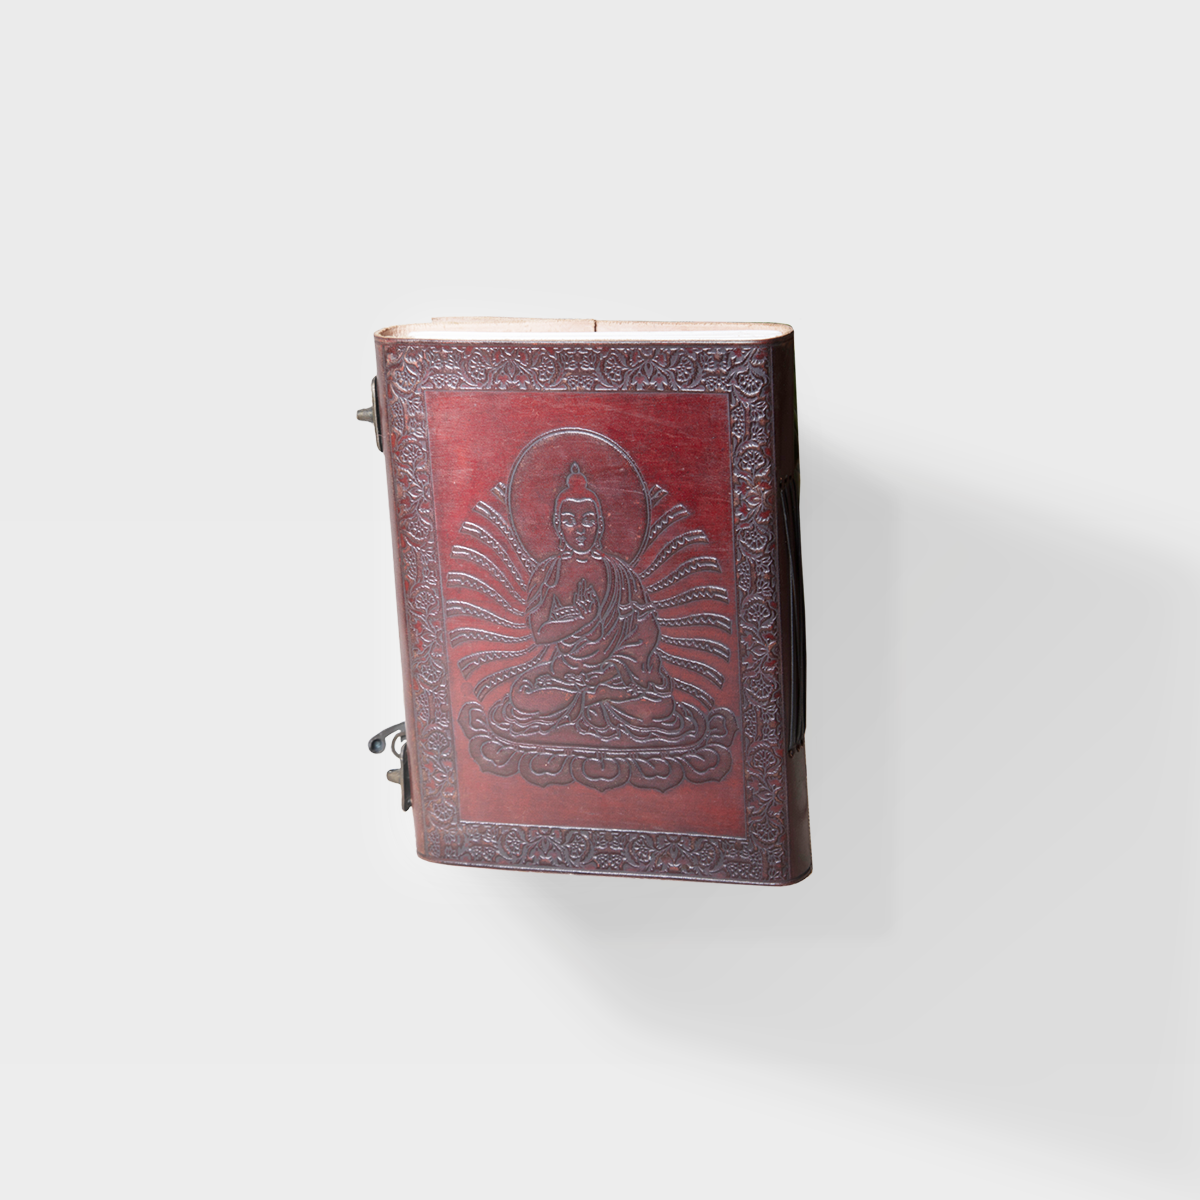 Enlightenment of the Buddha - 9x6 - Large Leather Journal